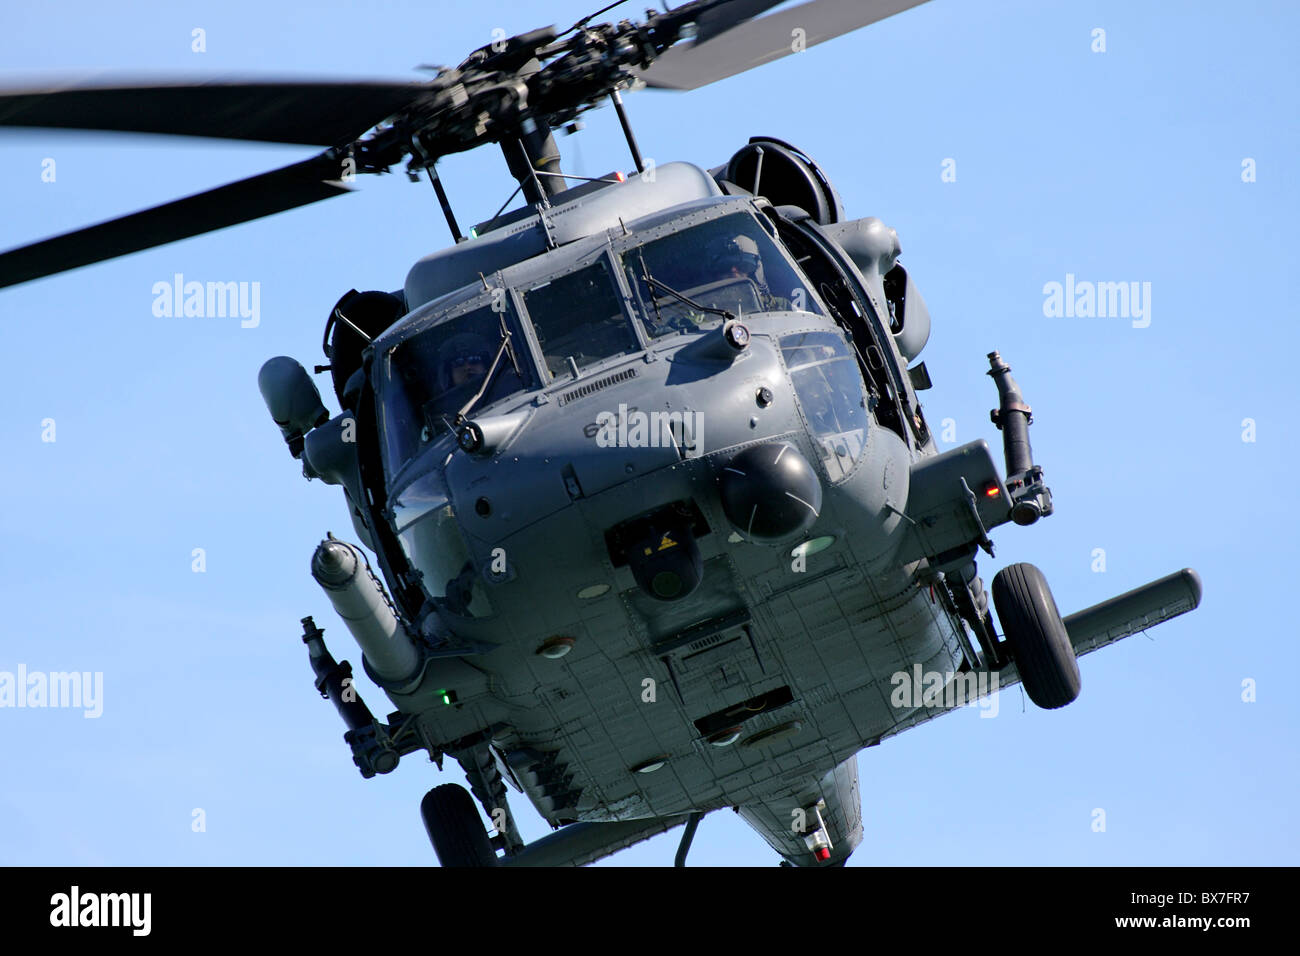 MH-60G Blackhawk CSAR Combat Search & Rescue helicopter in flight during the 2010 San Francisco Fleet Week Airshow. Stock Photo